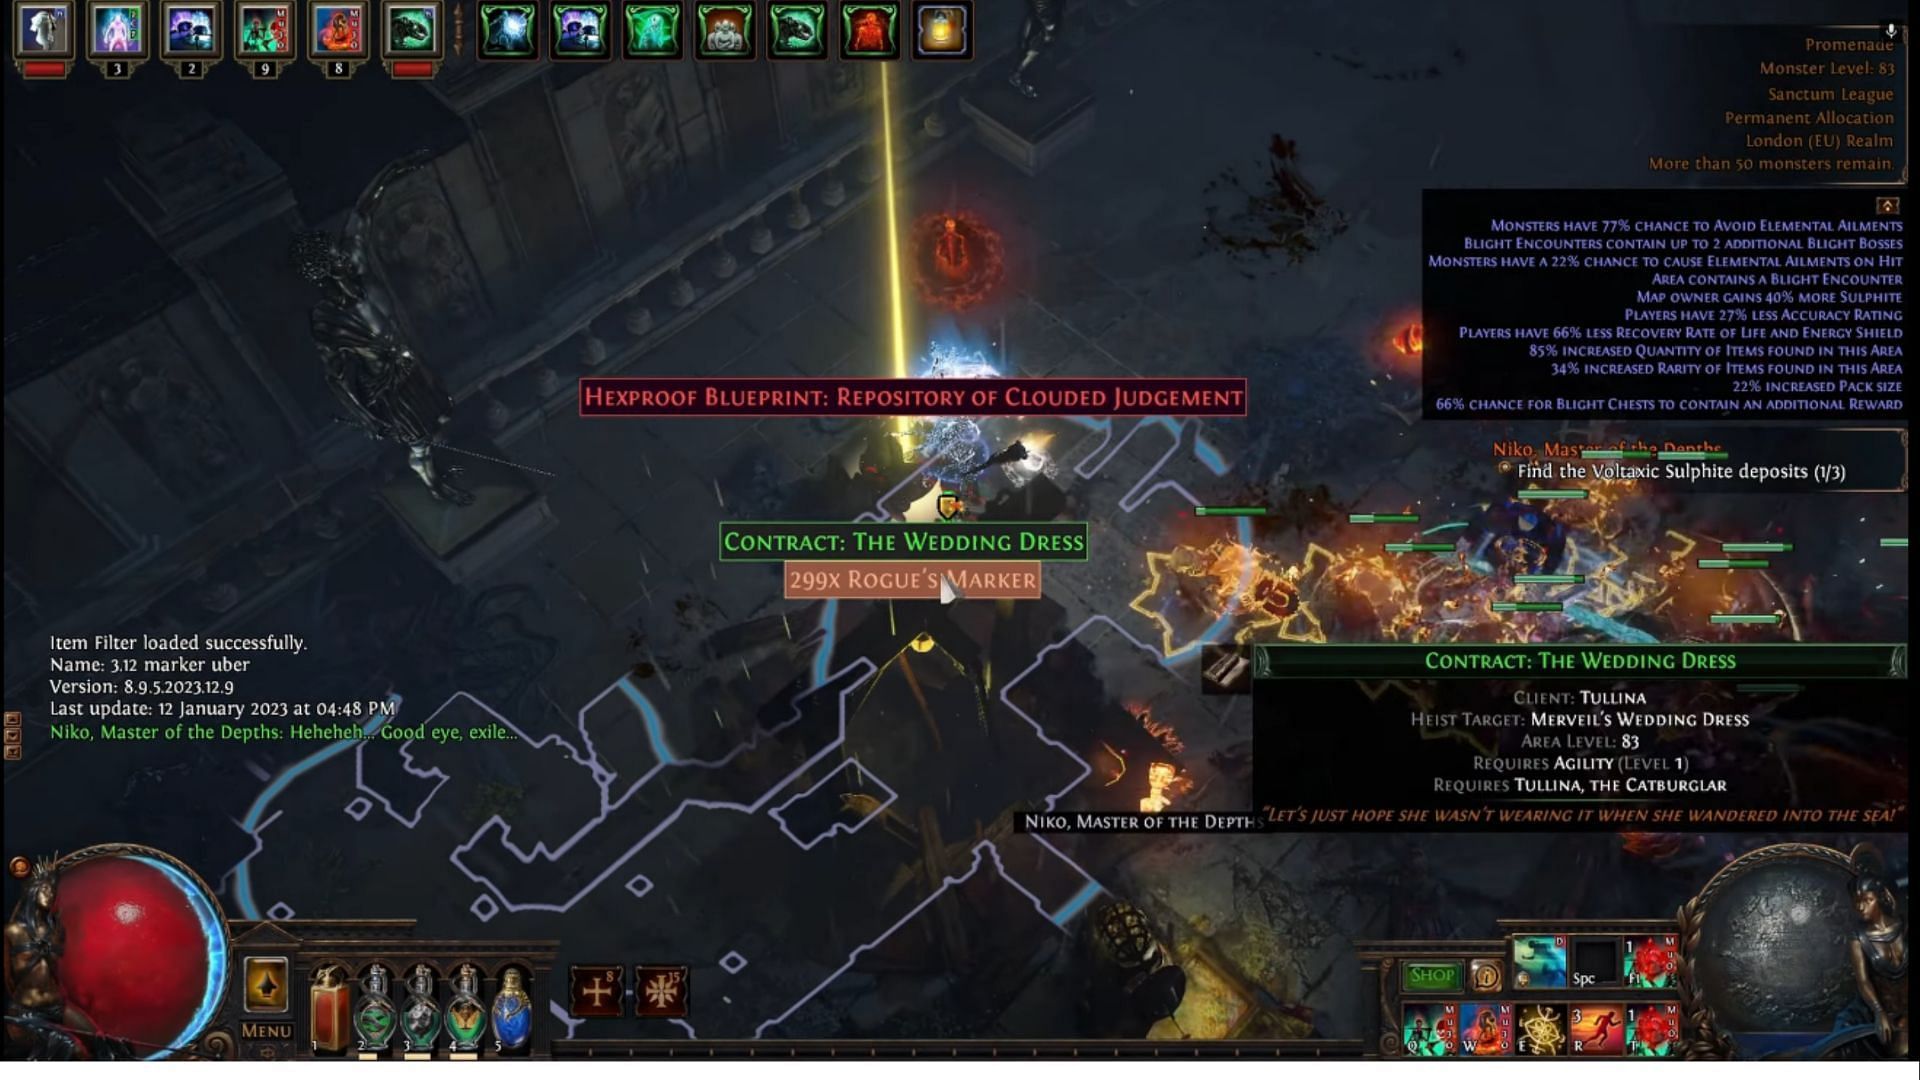 Minion builds are so fun in Path of Exile